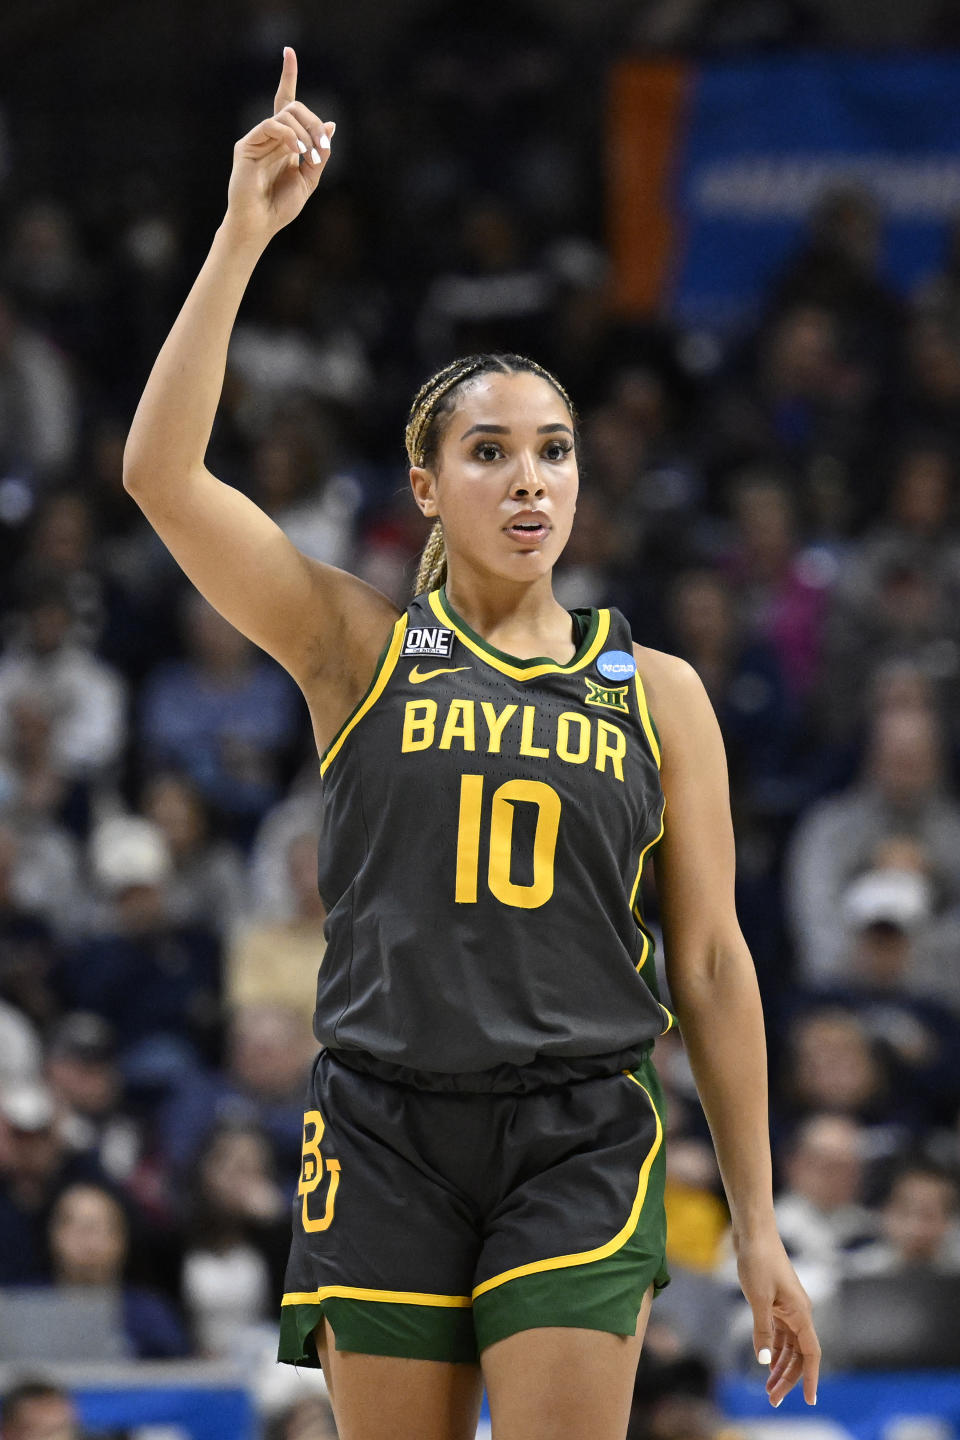 Baylor's Jaden Owens (10) gestures after making a basket in the second half of a second-round college basketball game against UConn in the NCAA Tournament, Monday, March 20, 2023, in Storrs, Conn. (AP Photo/Jessica Hill)